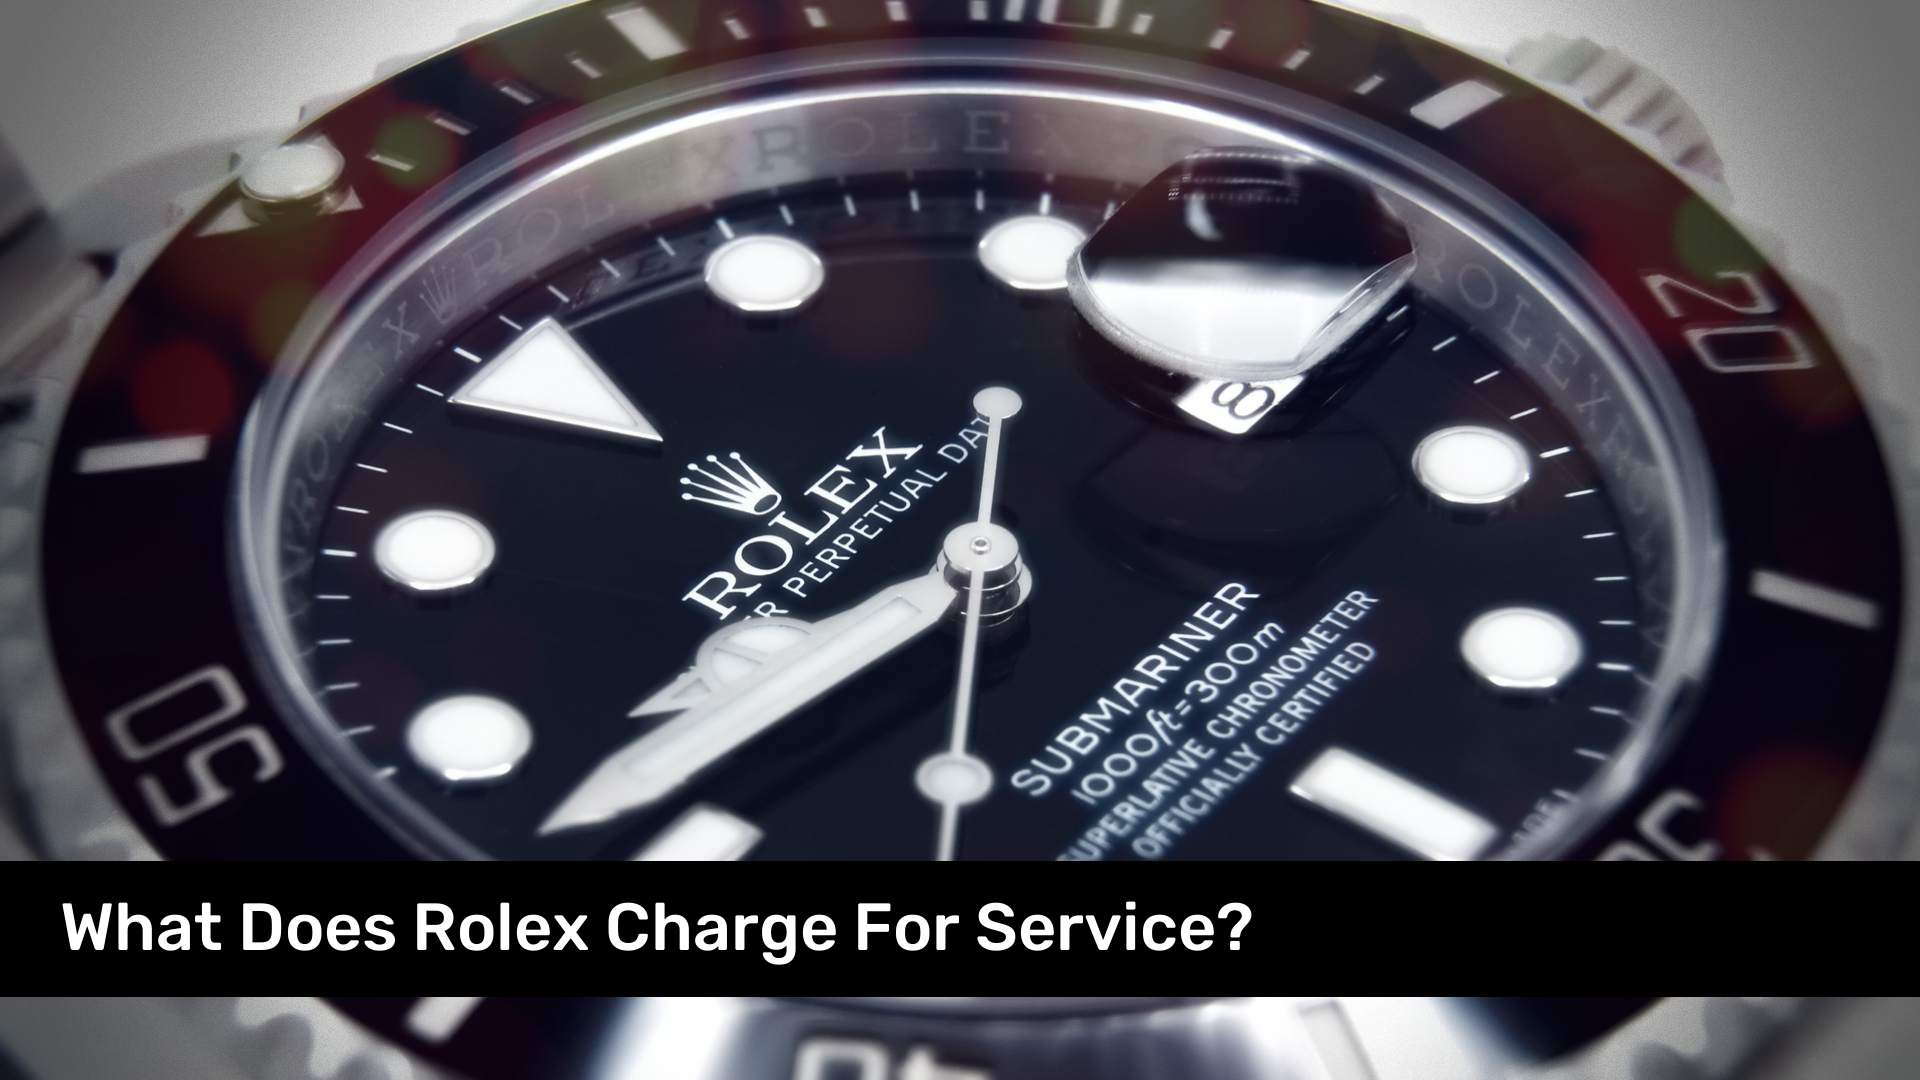 What Does Rolex Charge For Service?